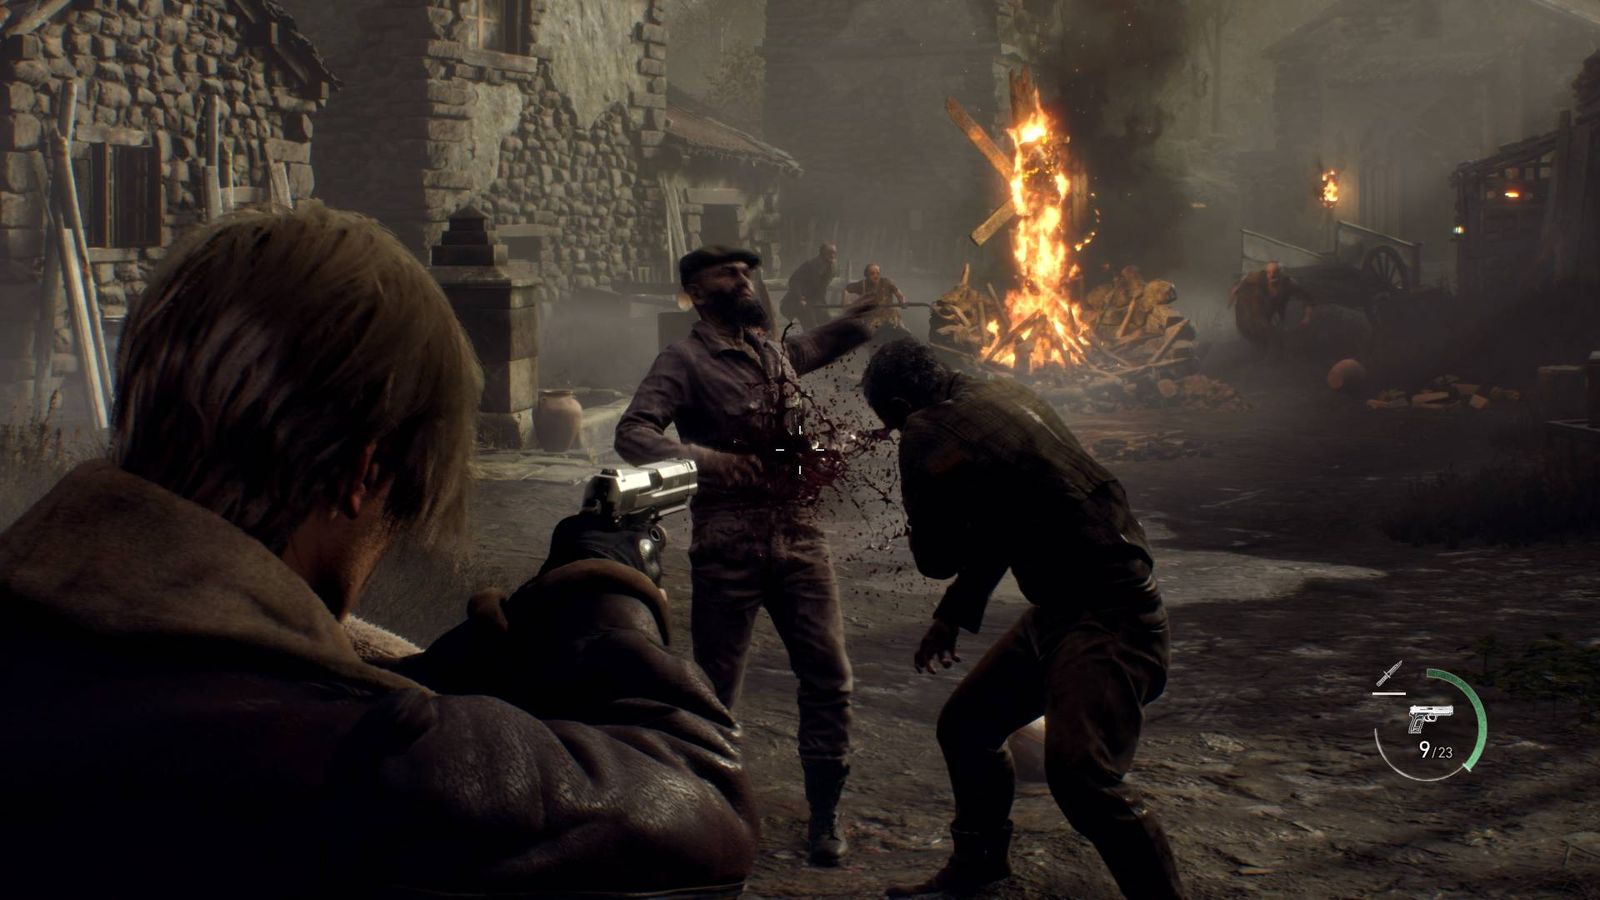 Leon shooting at infected villagers in Resident Evil 4 remake.